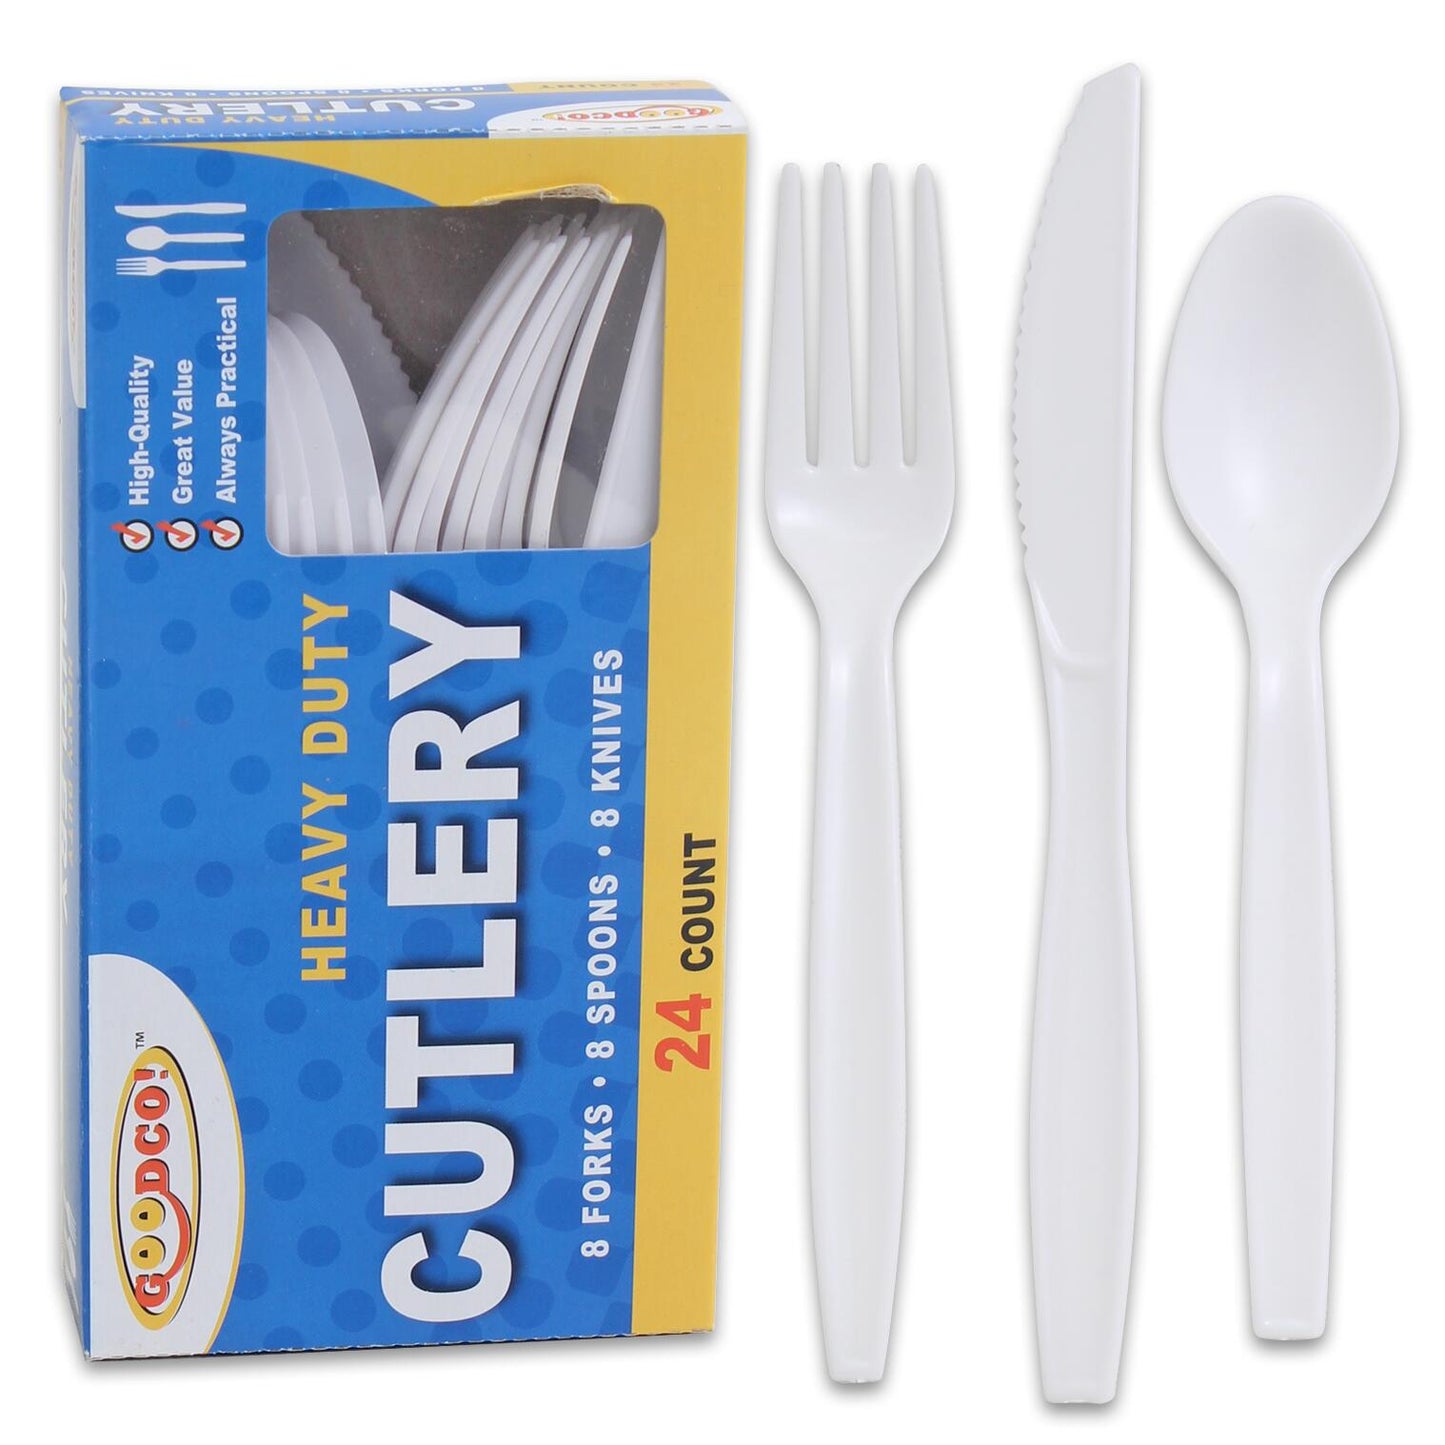 Goodco Heavy Duty Cutlery 24CT 8 Forks, 8 Spoons, 8 Knives